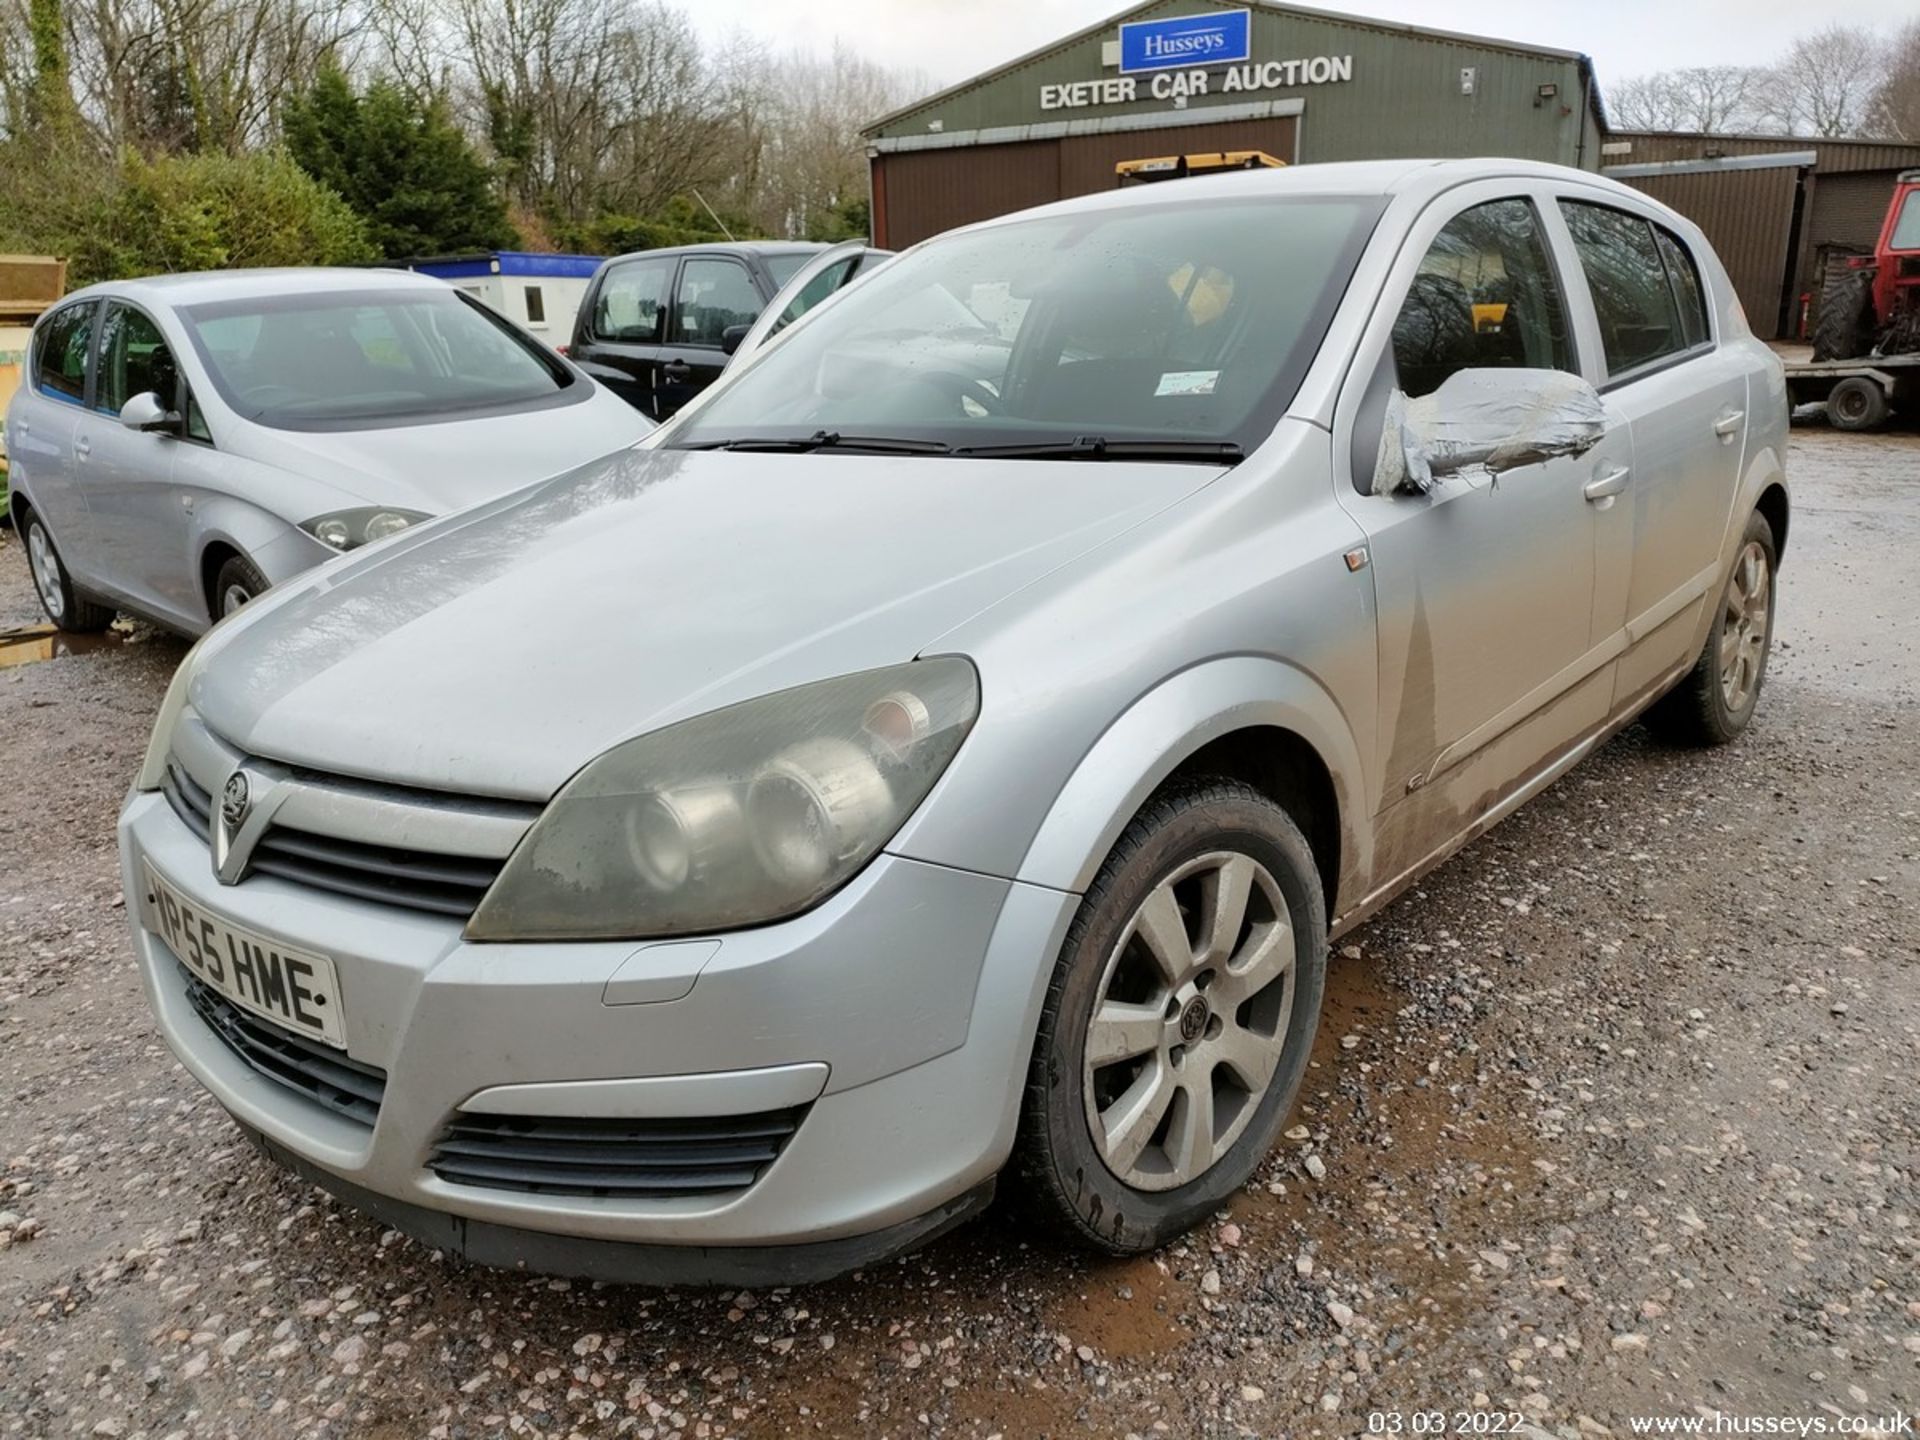 06/55 VAUXHALL ASTRA BREEZE - 1598cc 5dr Hatchback (Silver) - Image 4 of 23